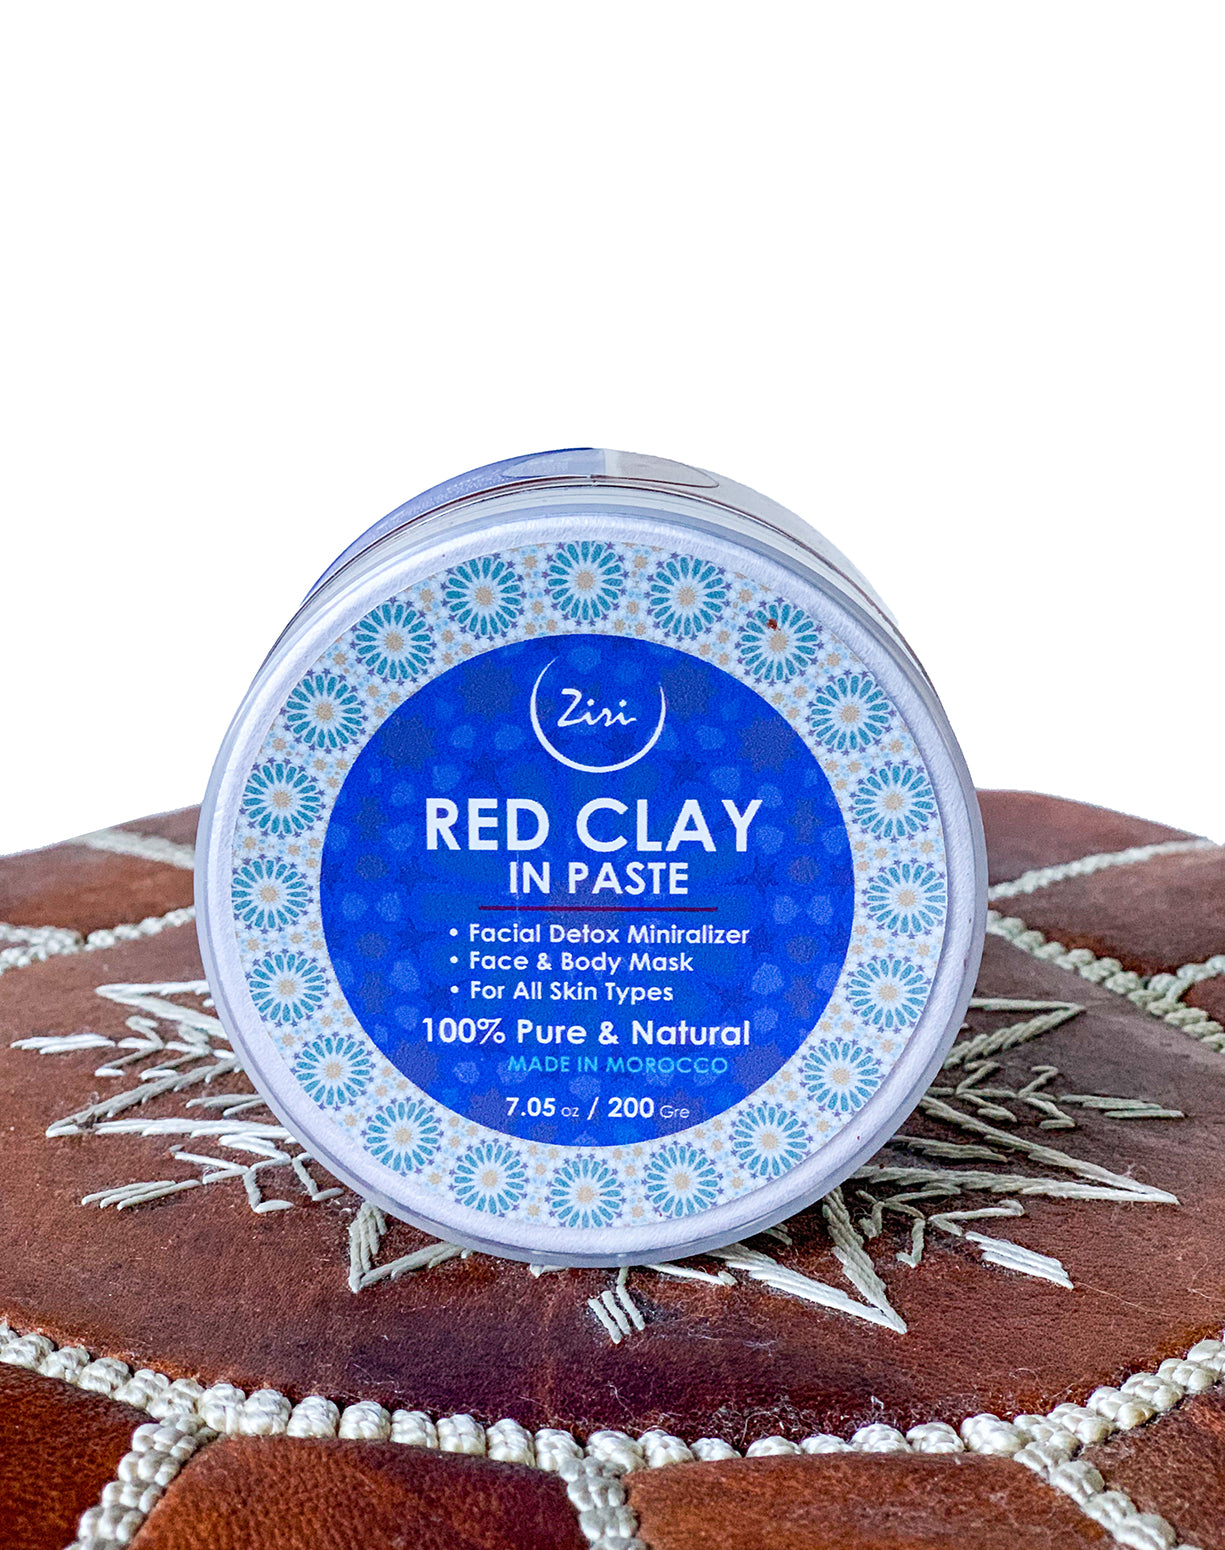 Moroccan Red Clay - Natural Moroccan Skin and Hair Care